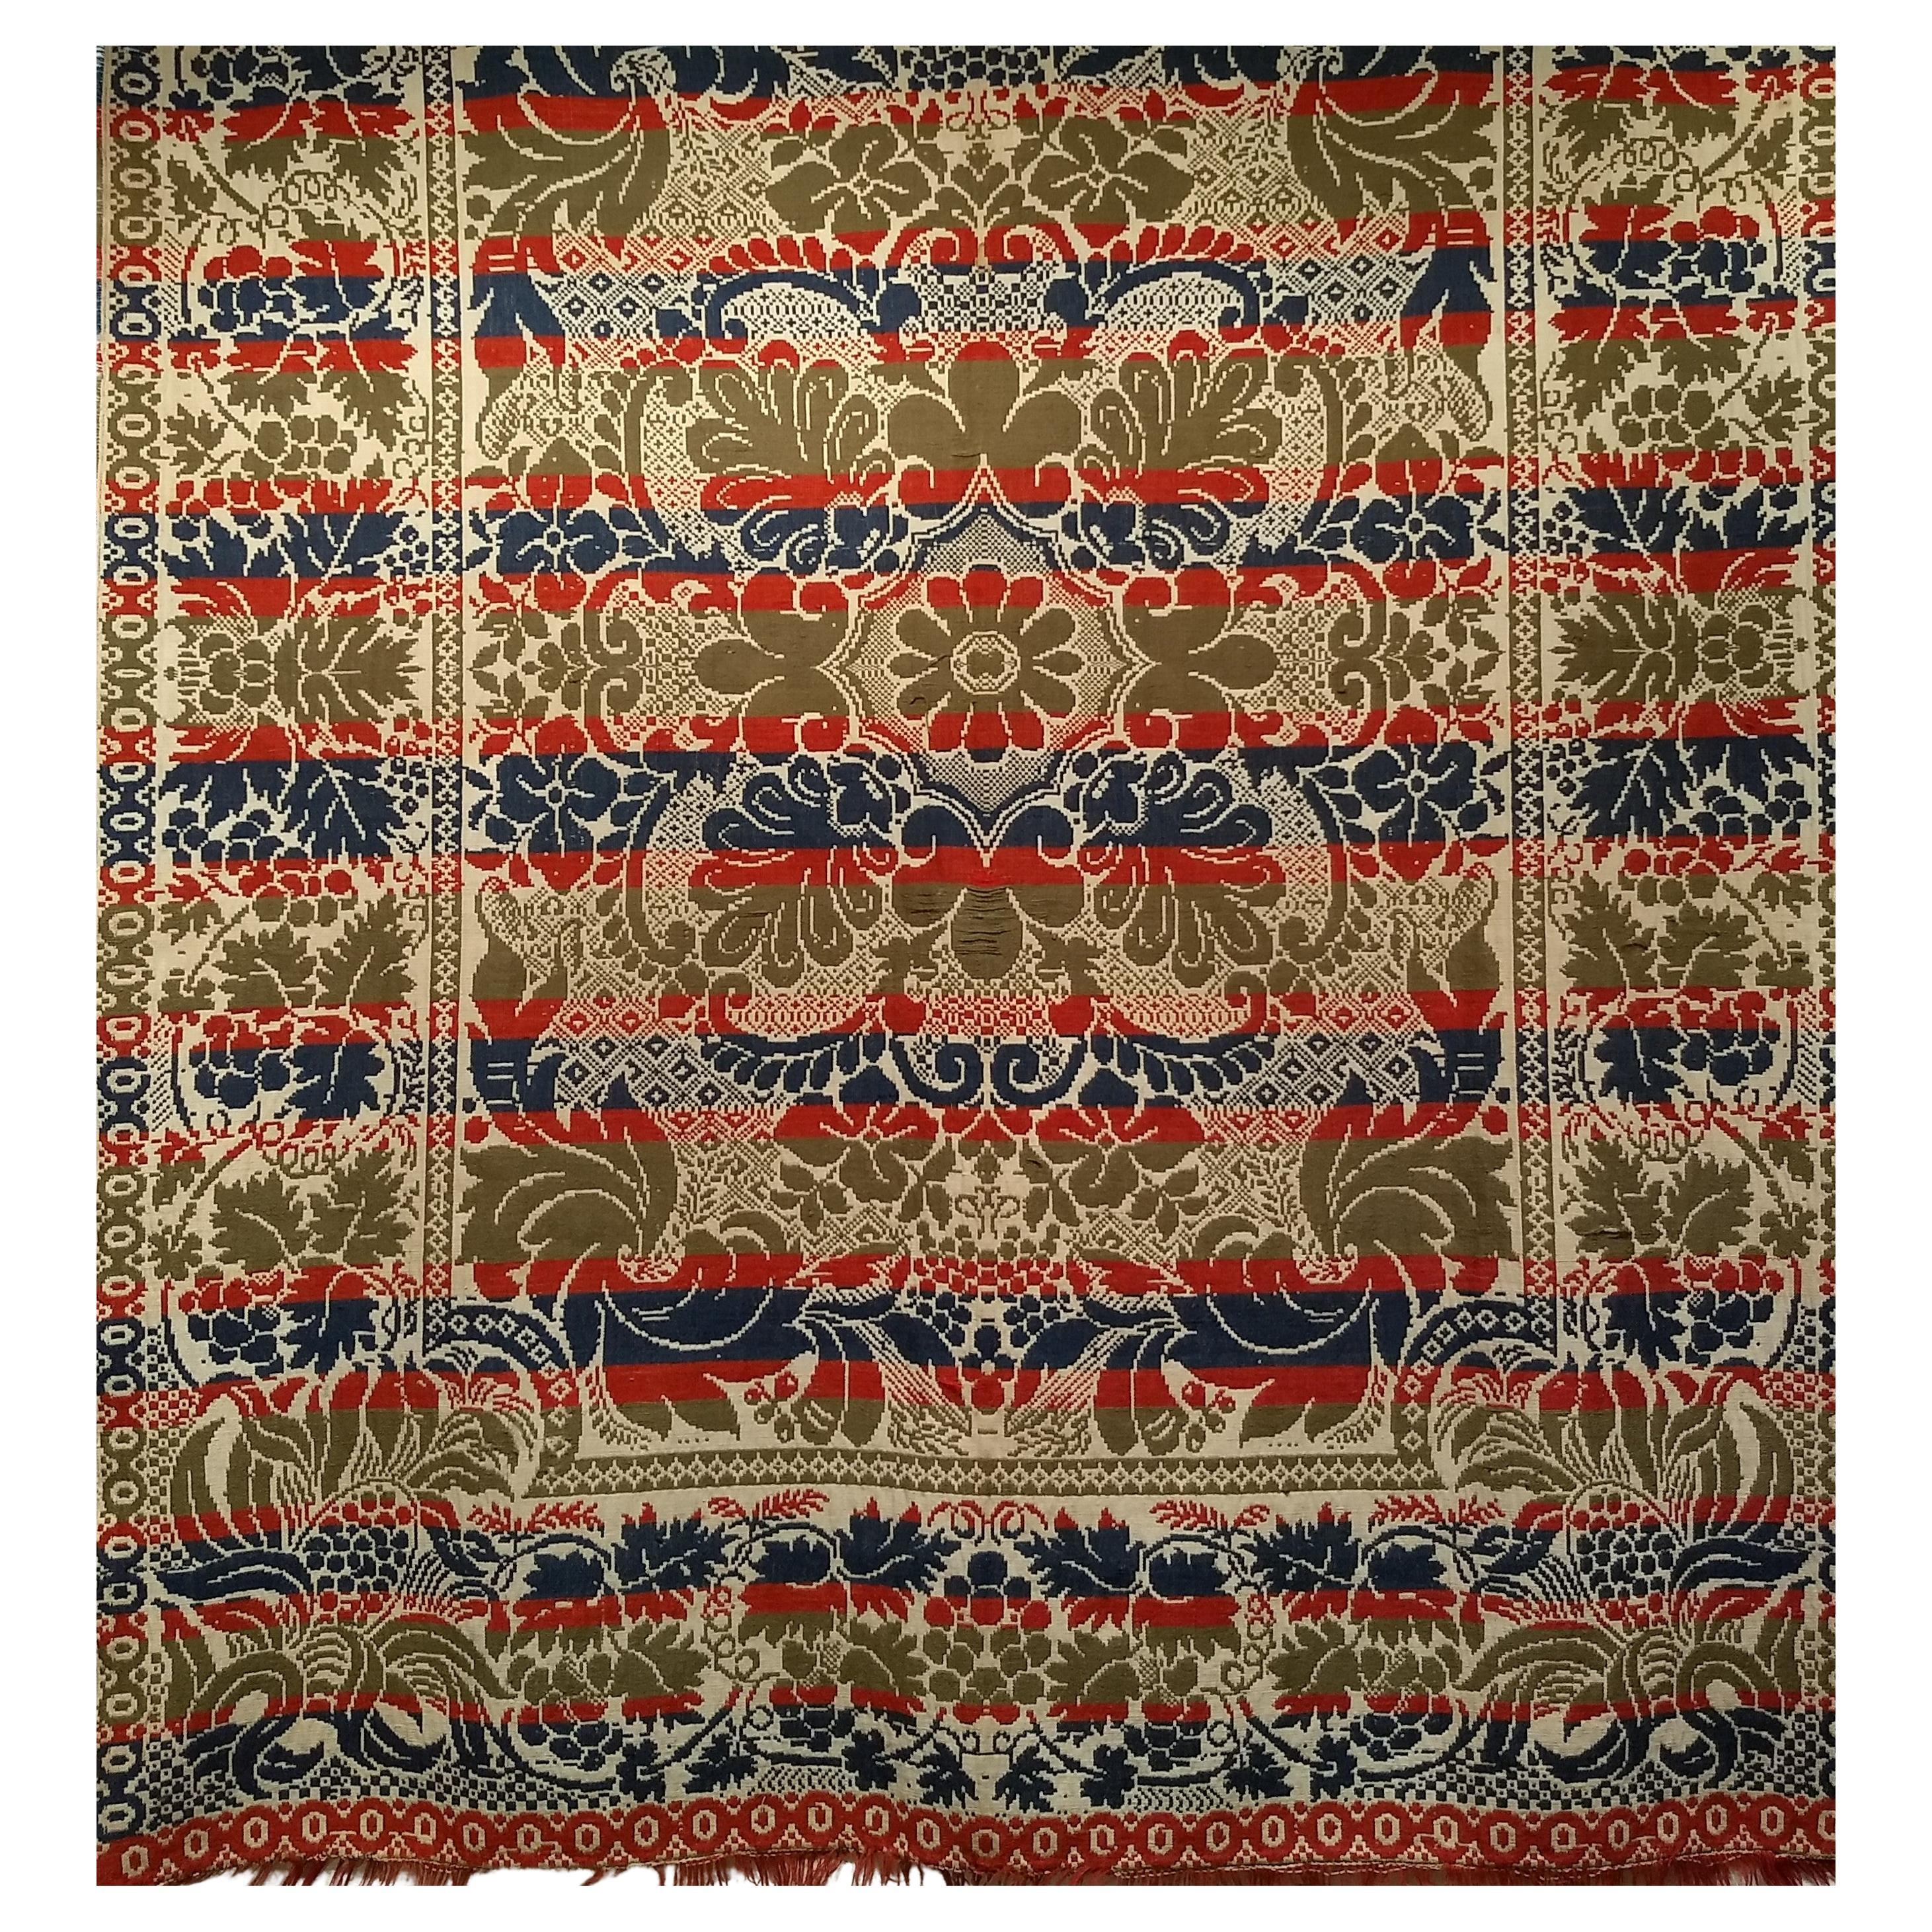 19th Century American Hand-Woven Four Color Coverlet in Red, Navy, Green, Ivory